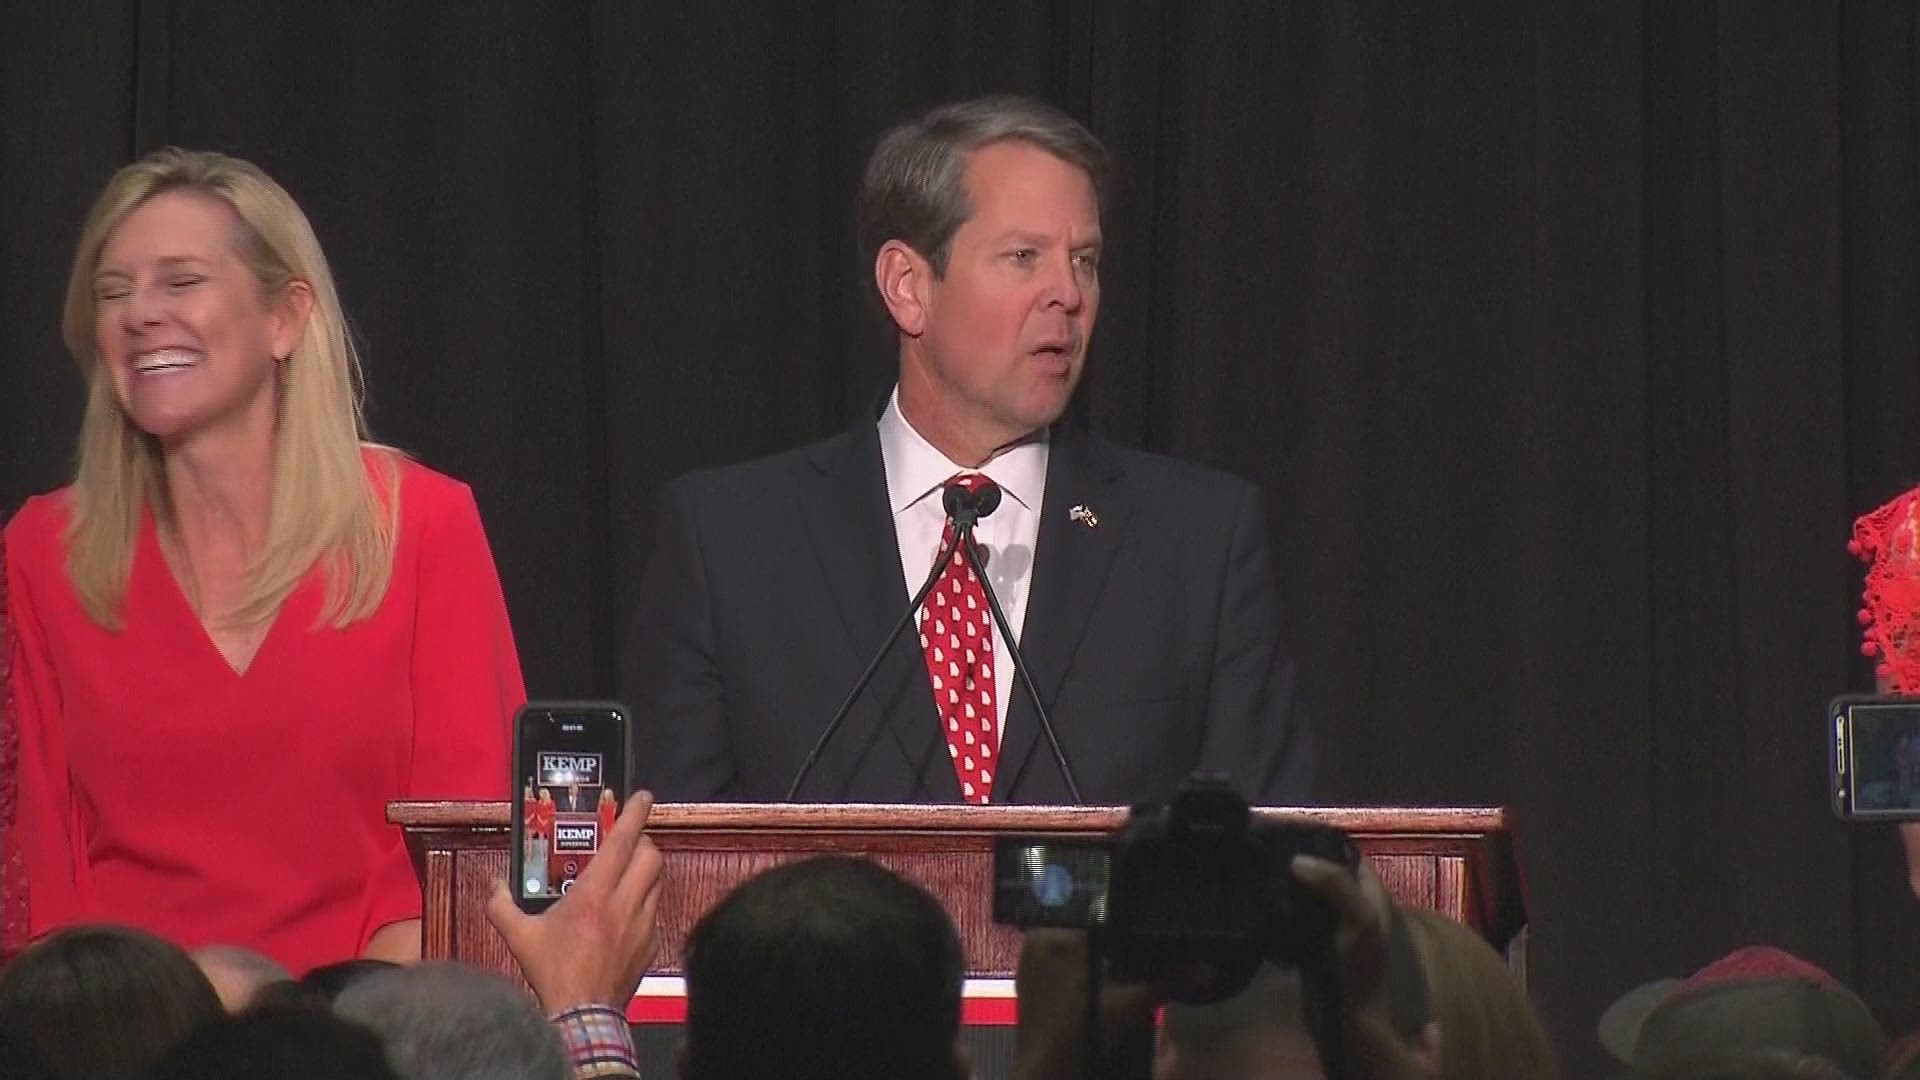 Ga. Gov. candidate Kemp: 'the math is on our side to win this election'